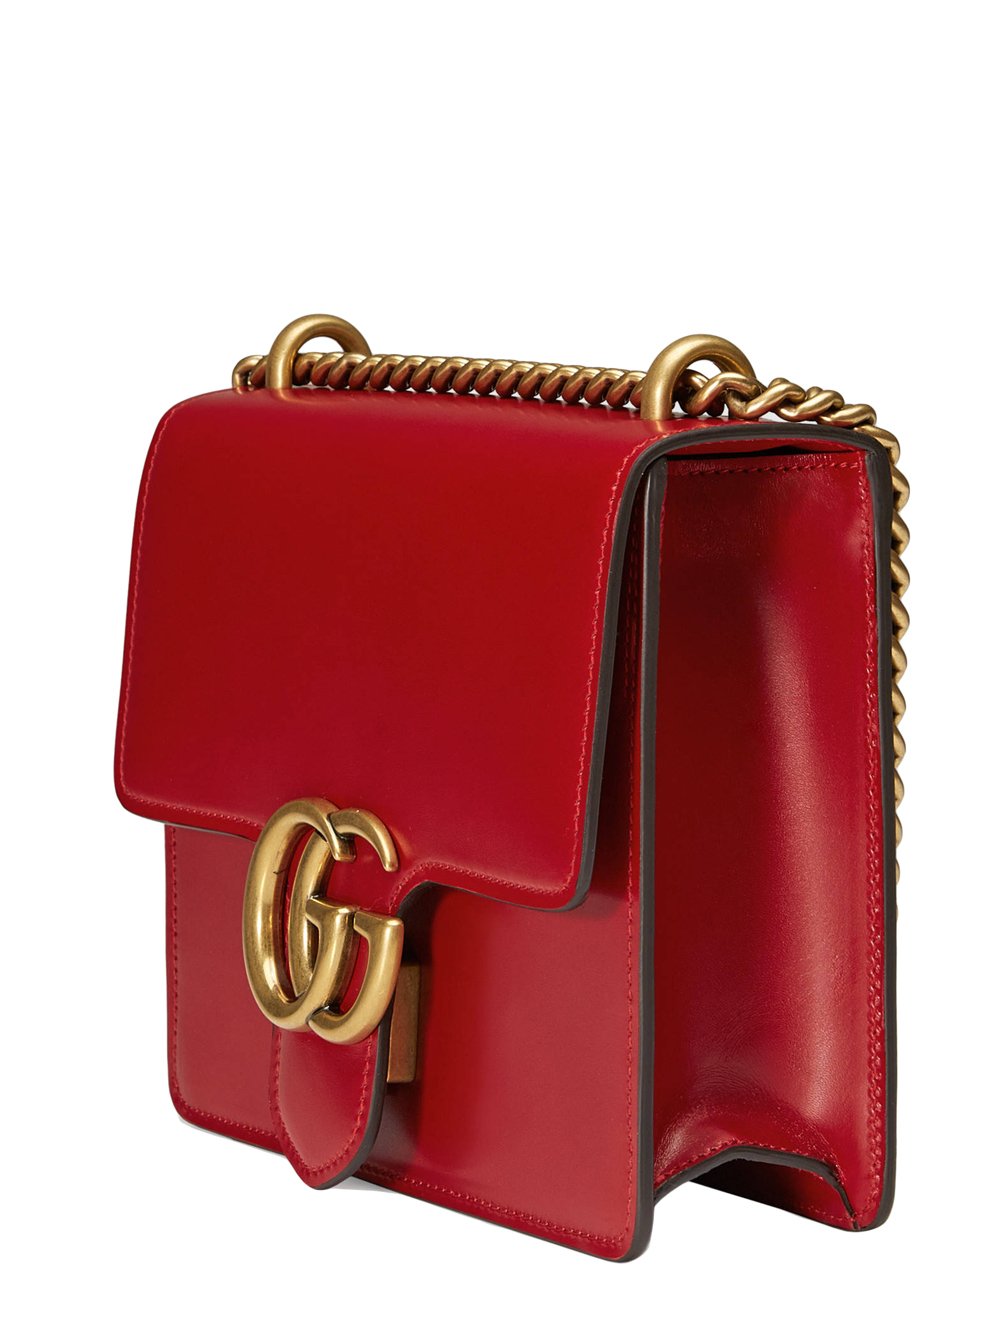  Gucci  Small Marmont  Bag  Red  in Red  Lyst